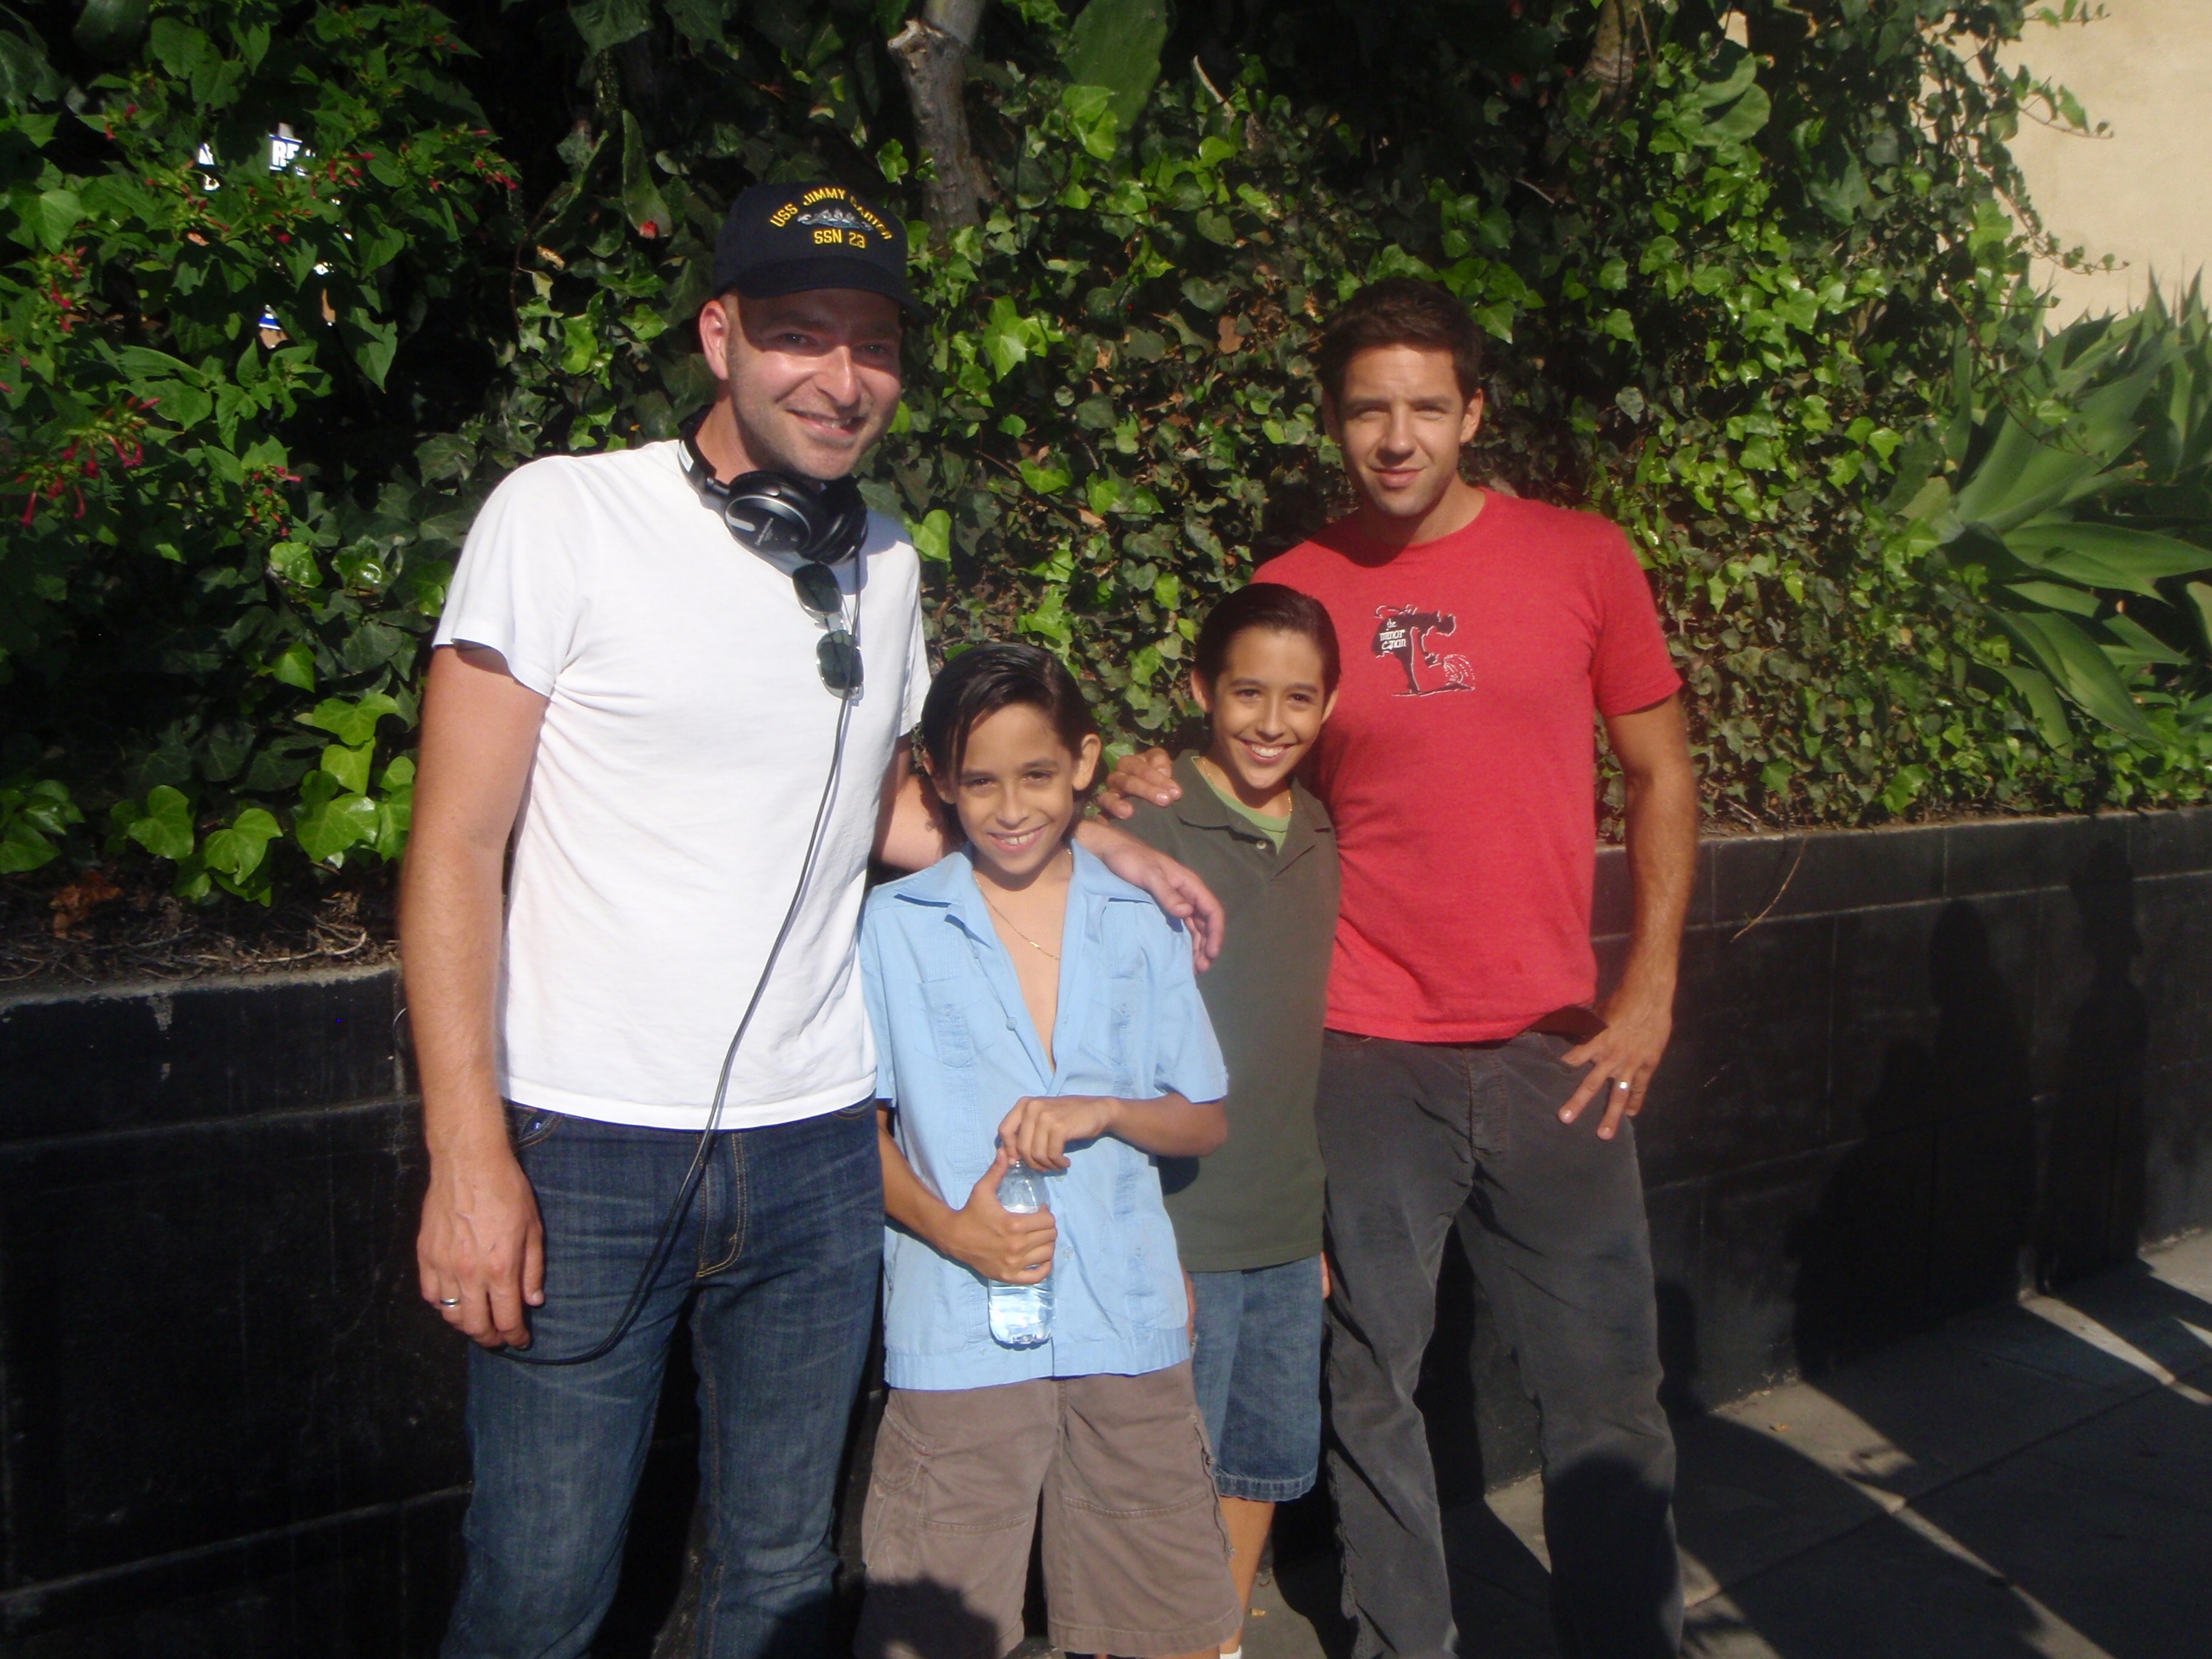 on set of Nesting with Dir. John Chudenko, fellow actor Todd Grinnell, and actor and brother Michael Pena.